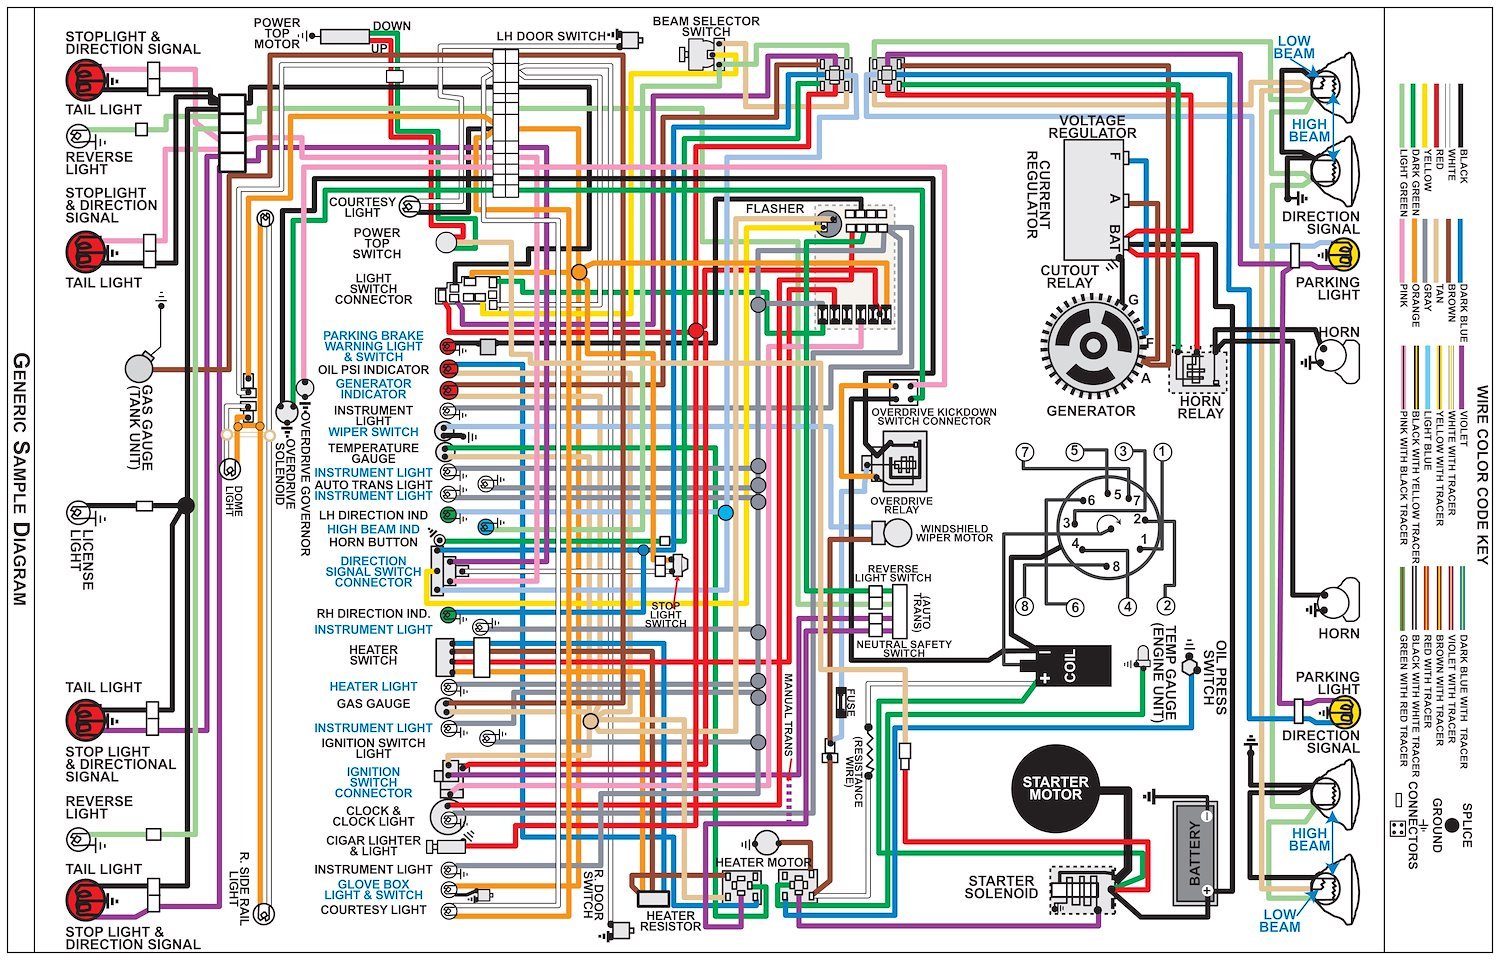 Wiring Diagram for 1970 Dodge Challenger with HEMI